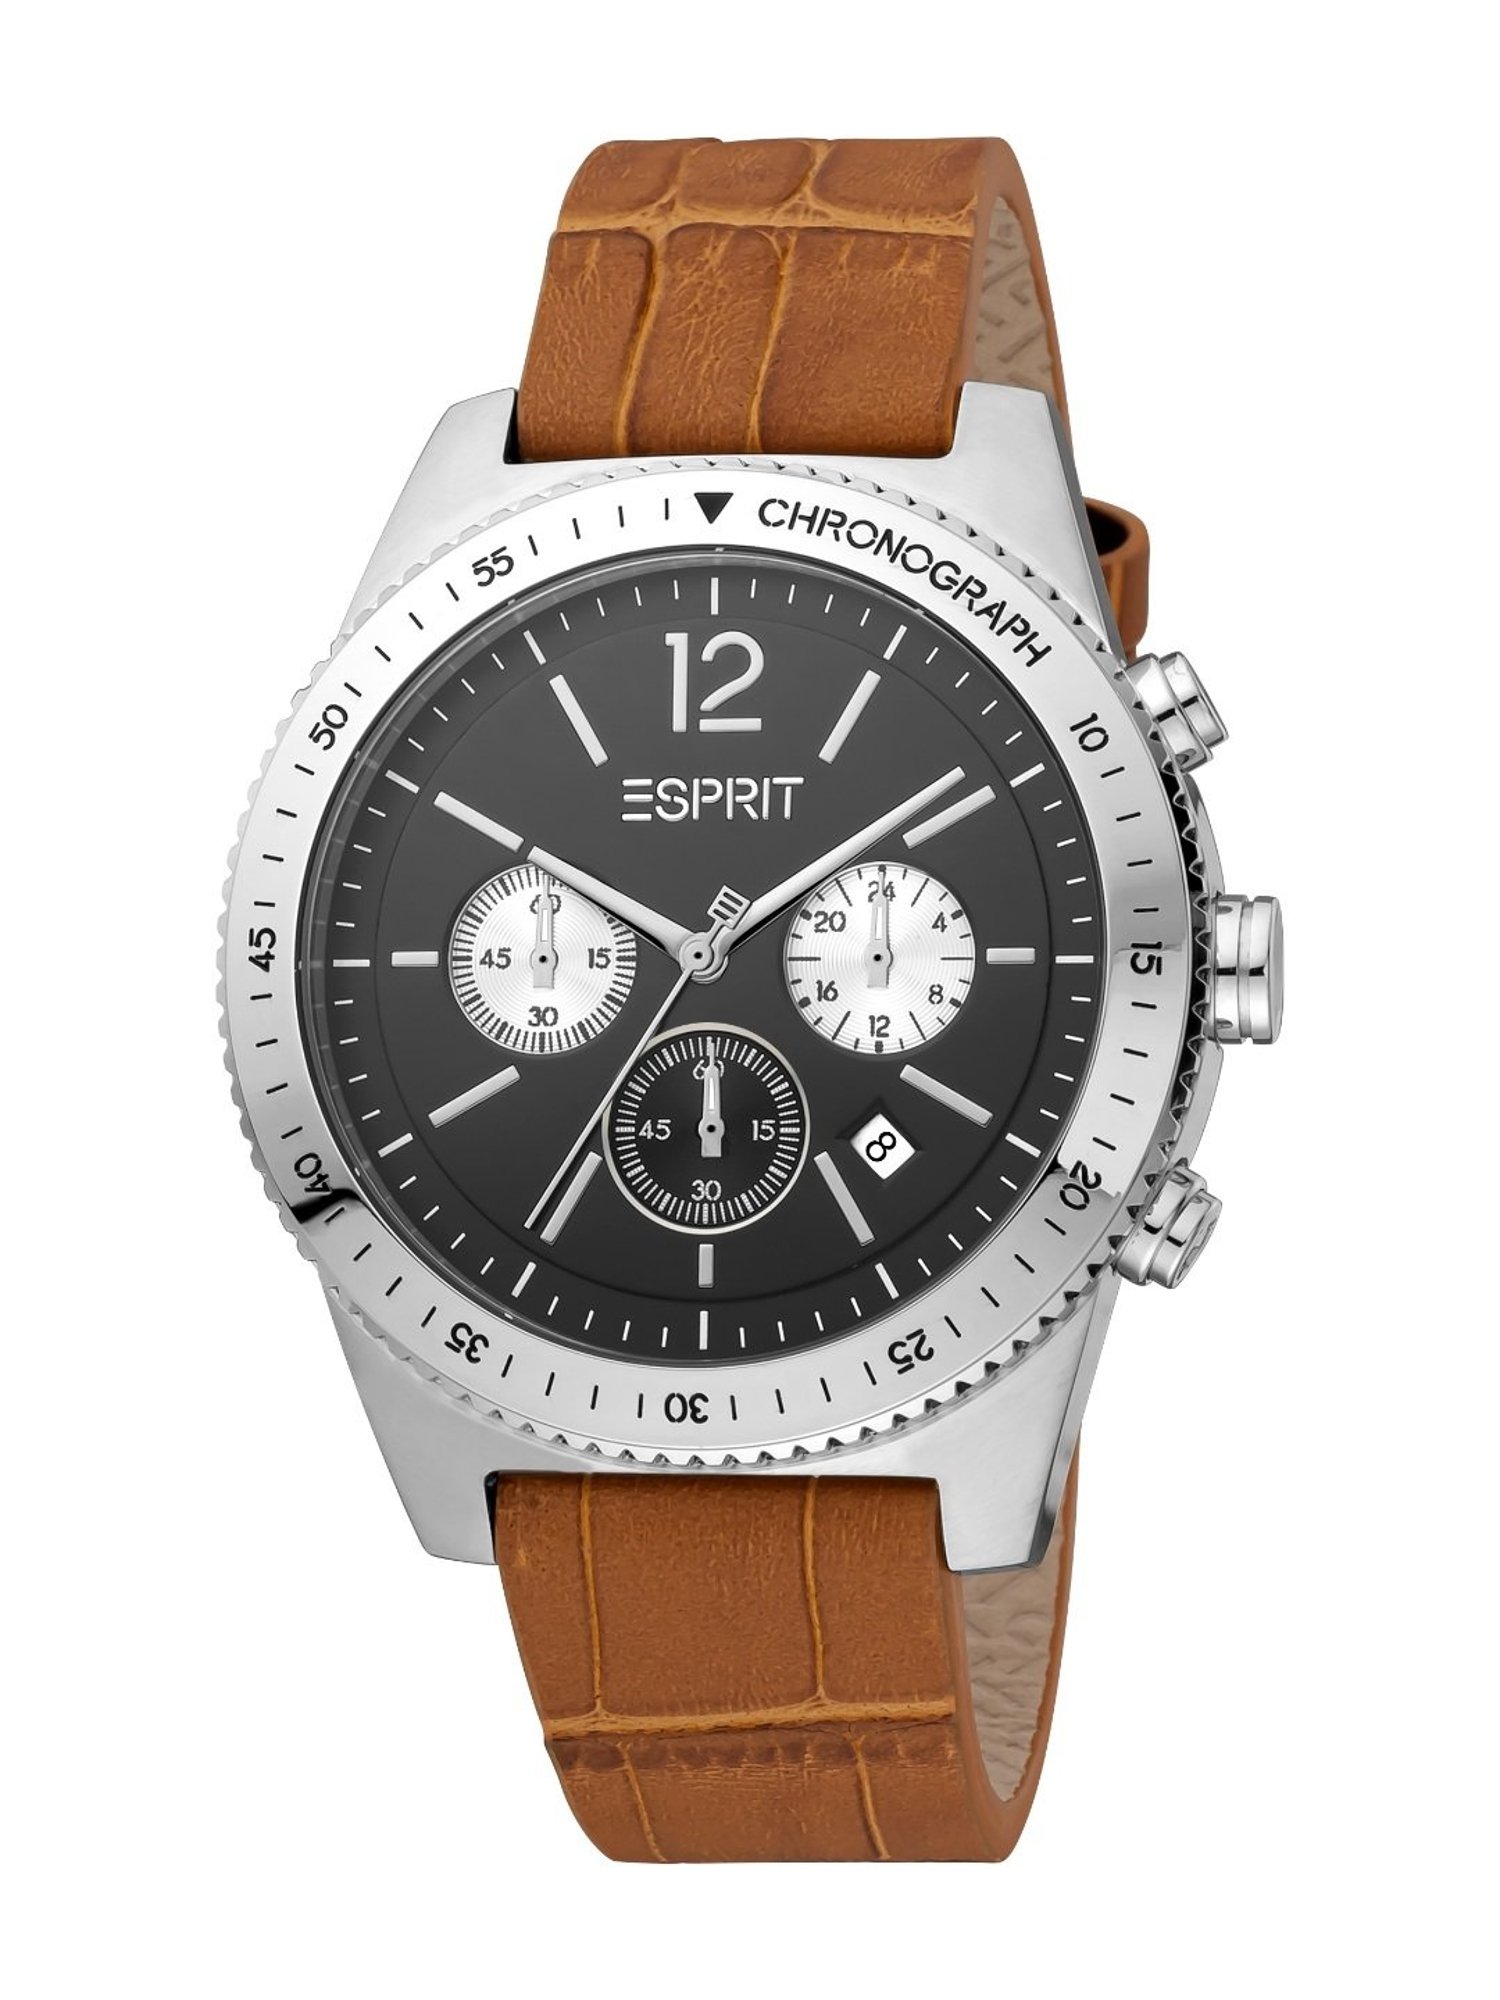 Esprit Watches | The Chinashop®